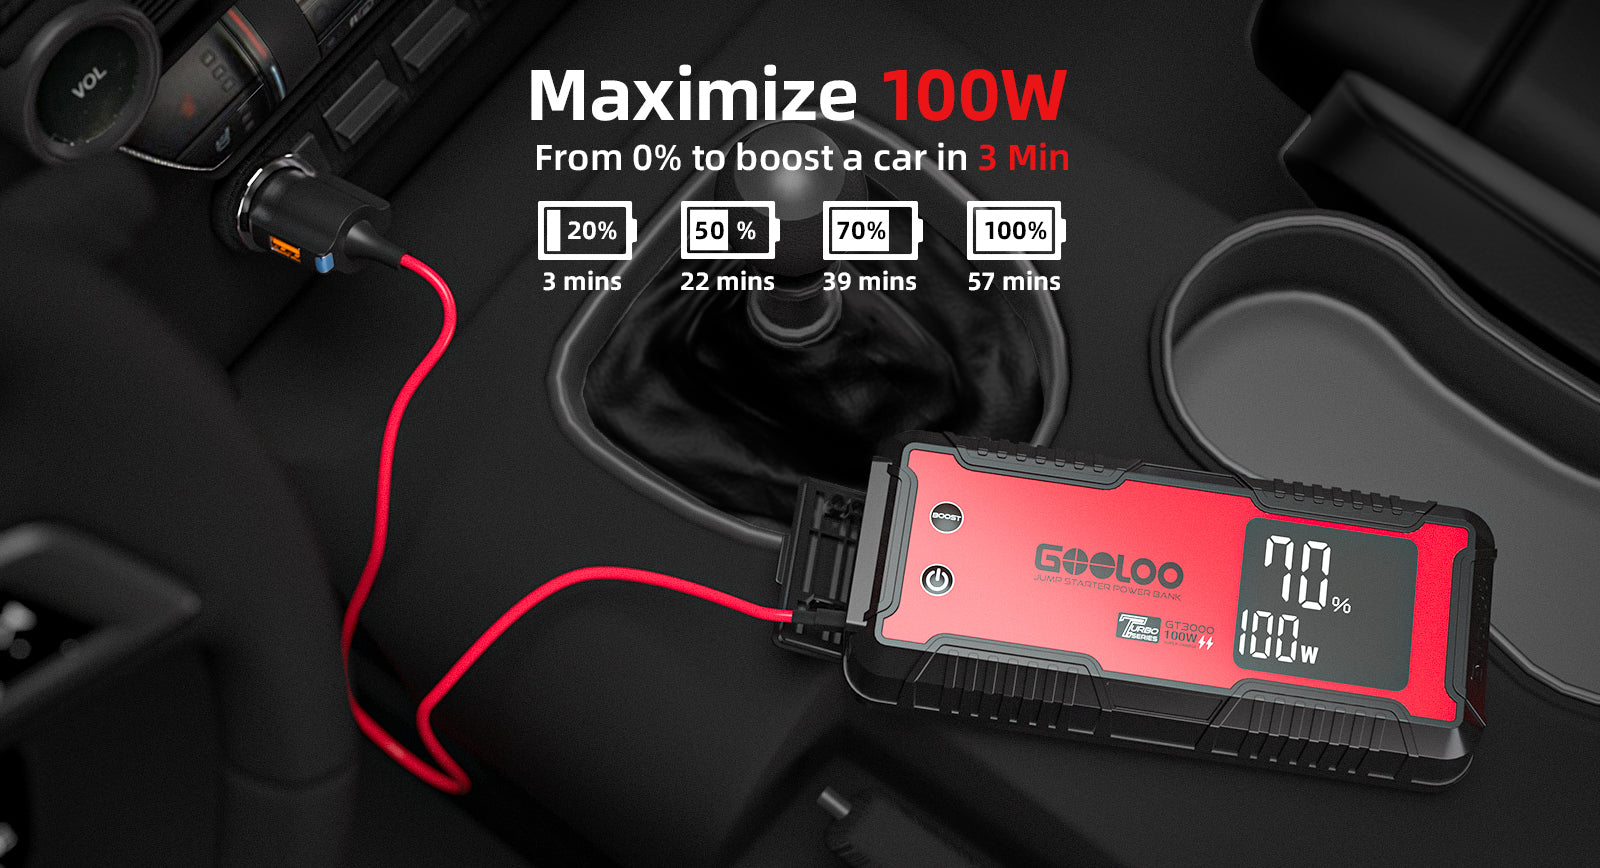 3-MIN SUPER-FAST CHARGE TO 20% READY TO BOOST